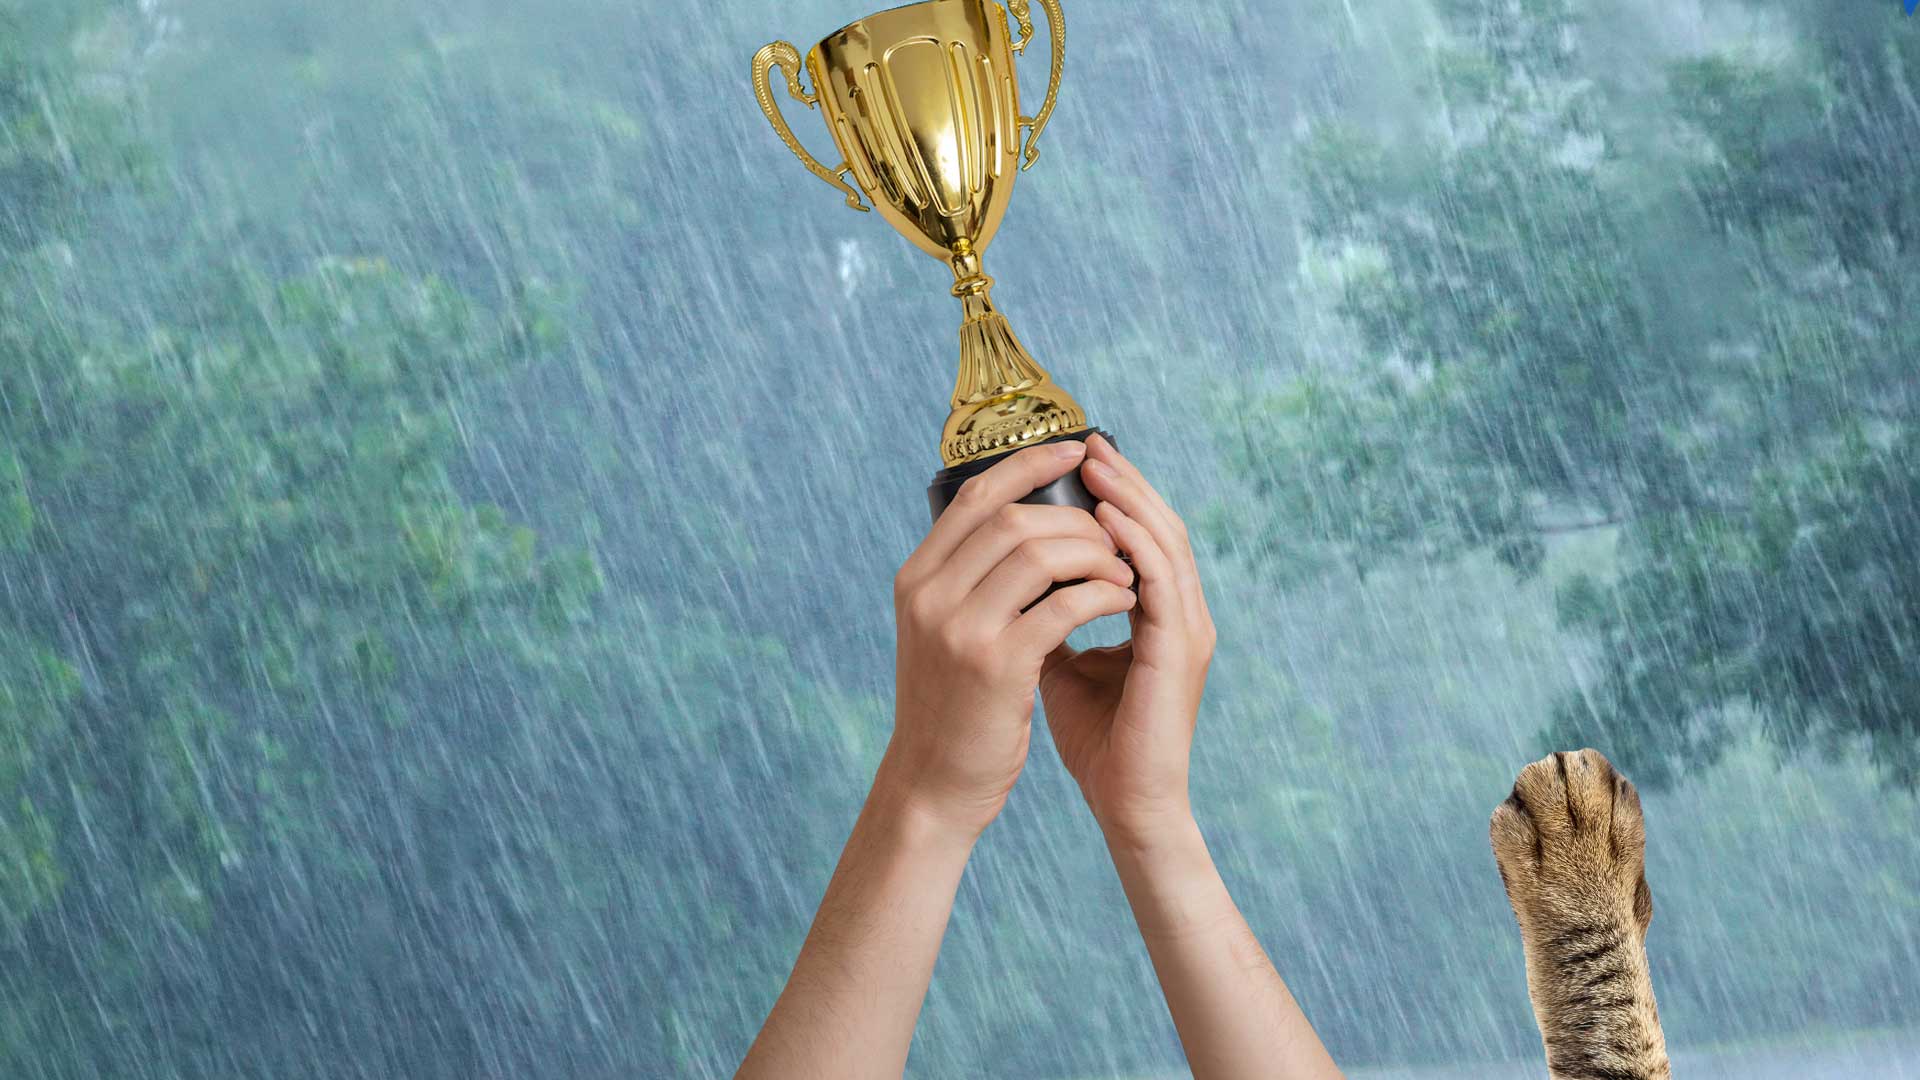 A golden trophy being held aloft on a rainy day